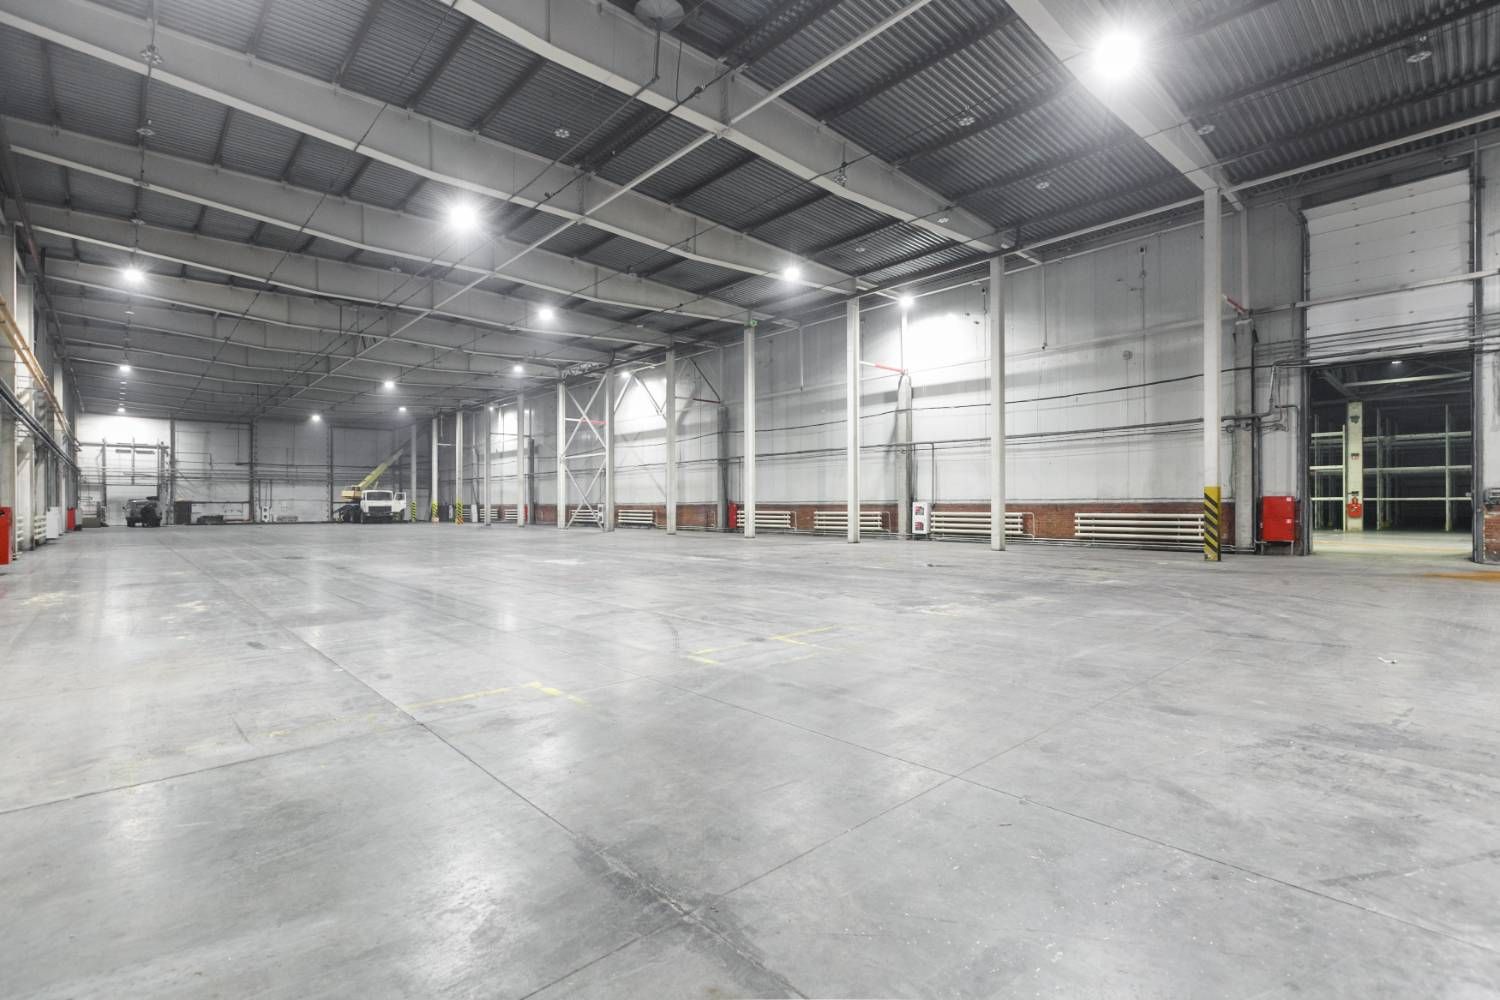 [size] sqft warehouse for rent in [city] img1